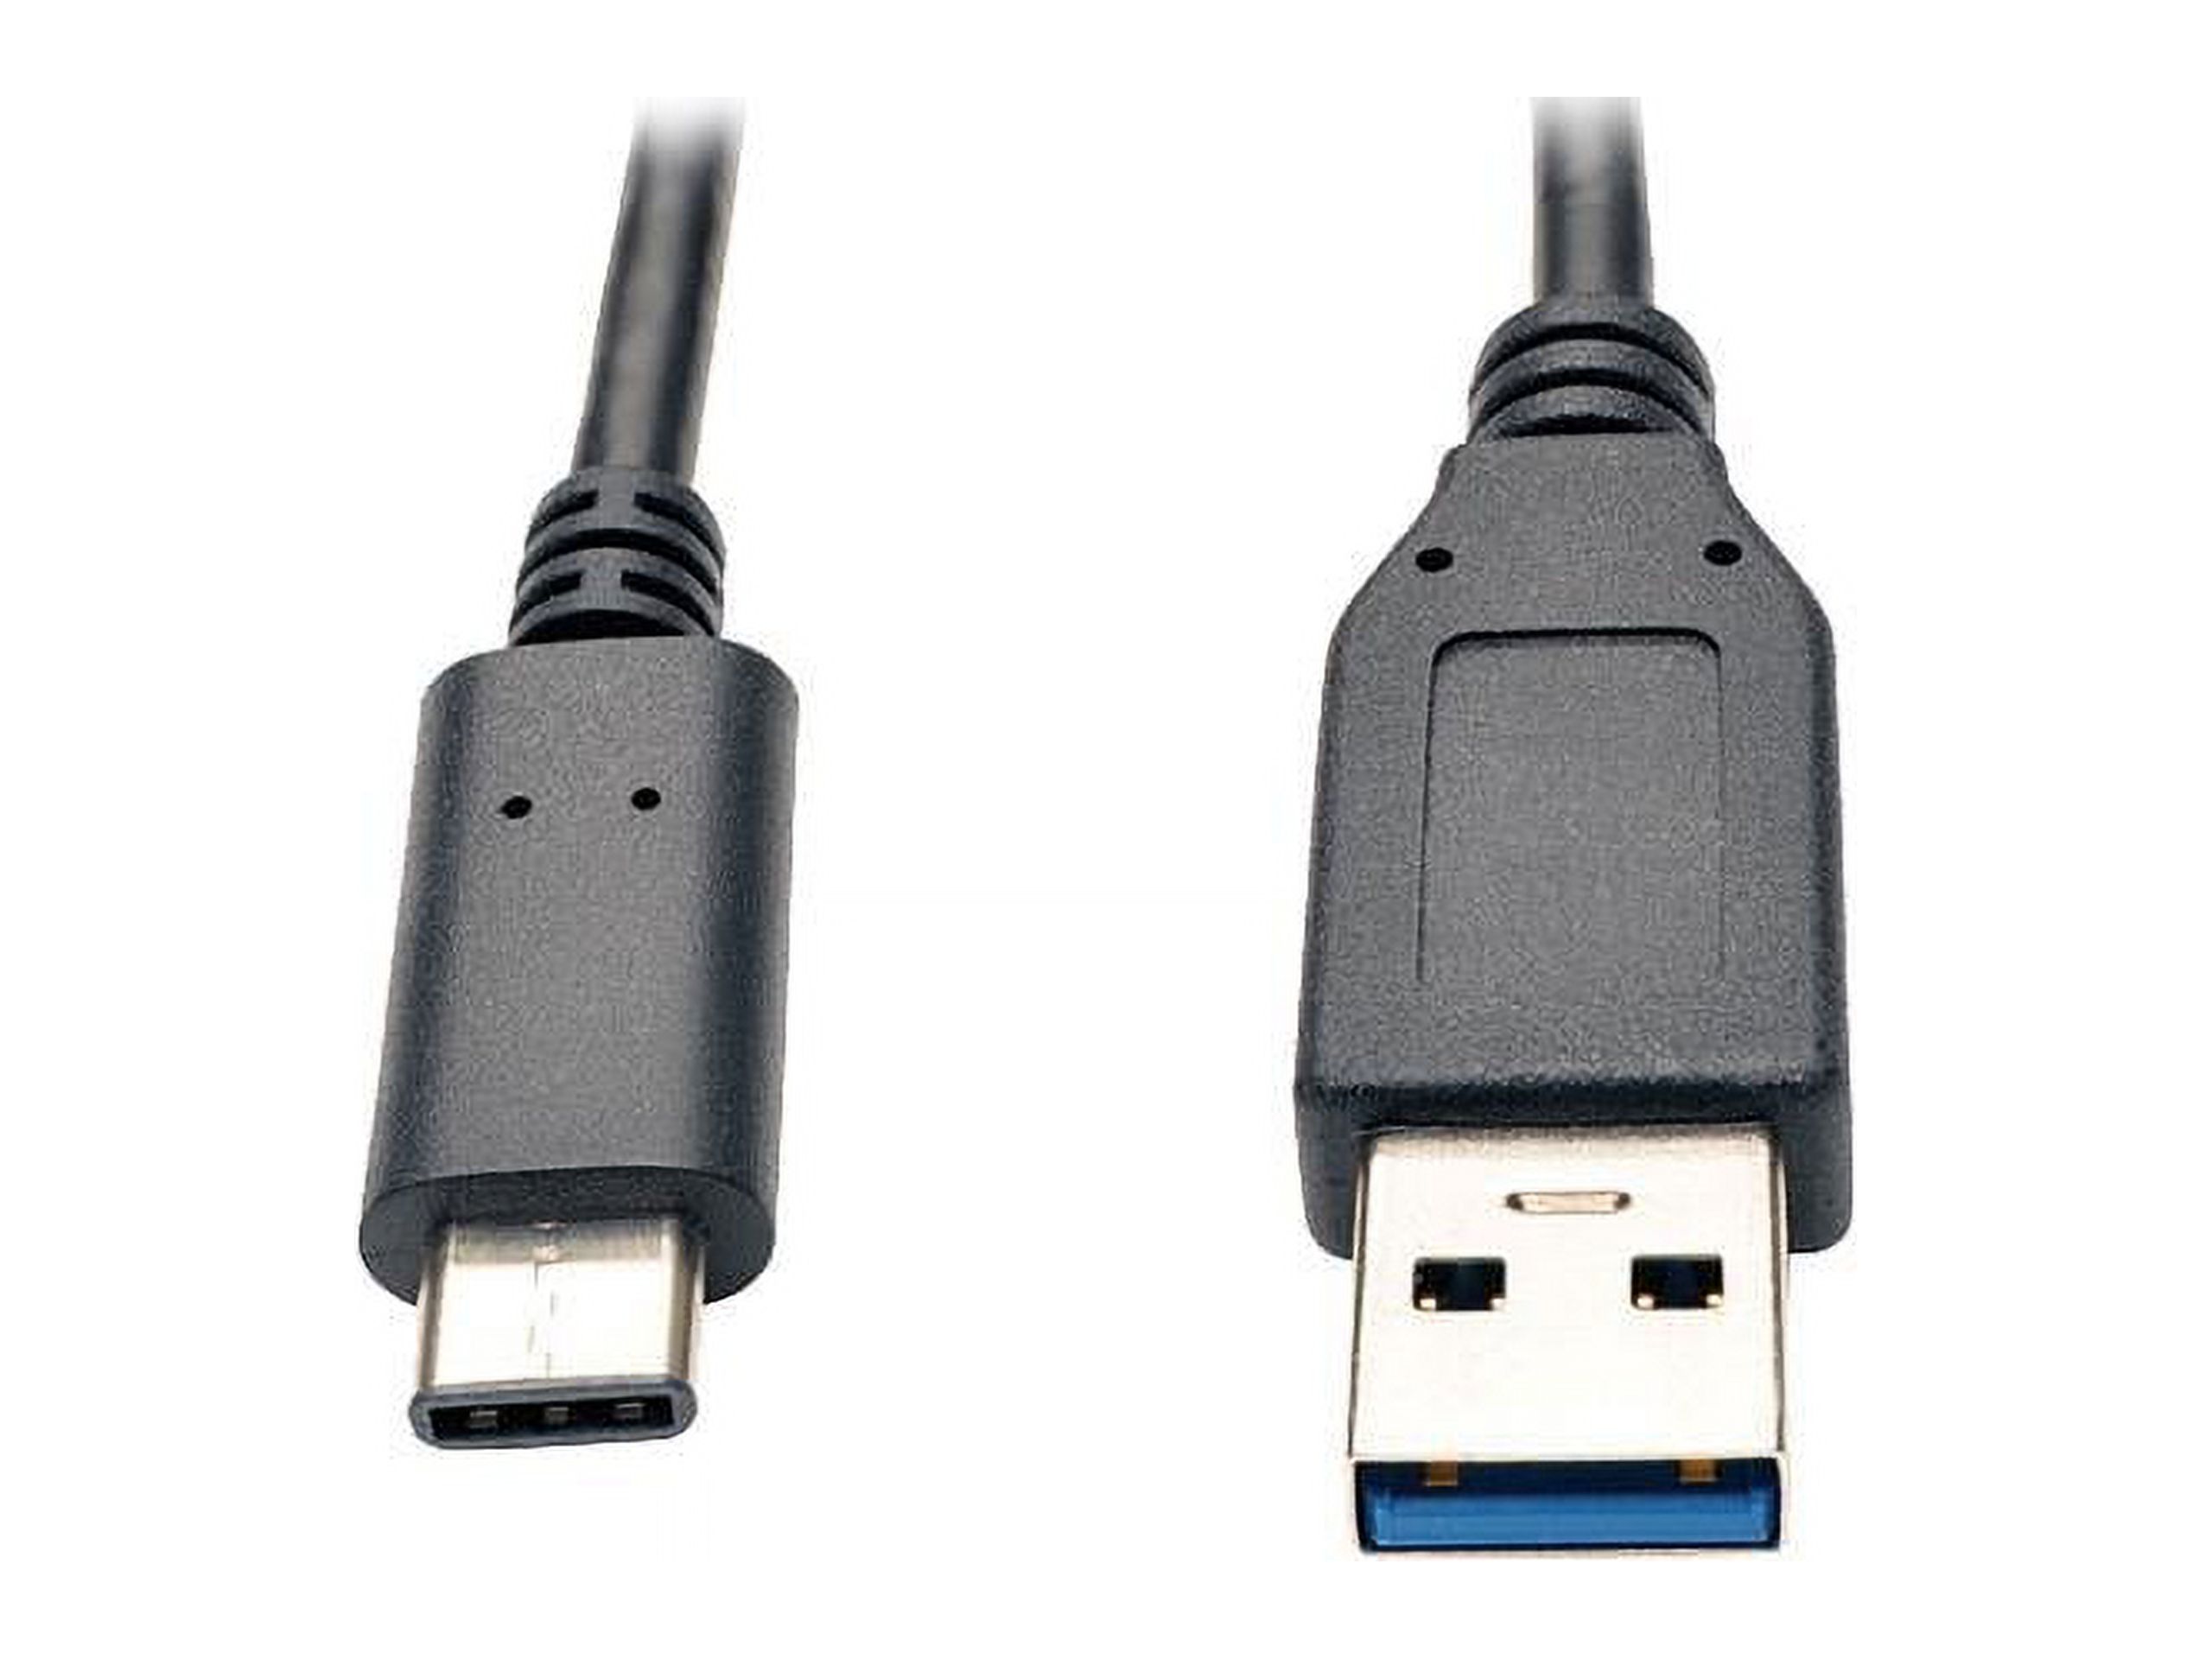 Tripp Lite U428-003 3' USB 3.1 Type C to USB 3.0 Type A Cable - image 1 of 8